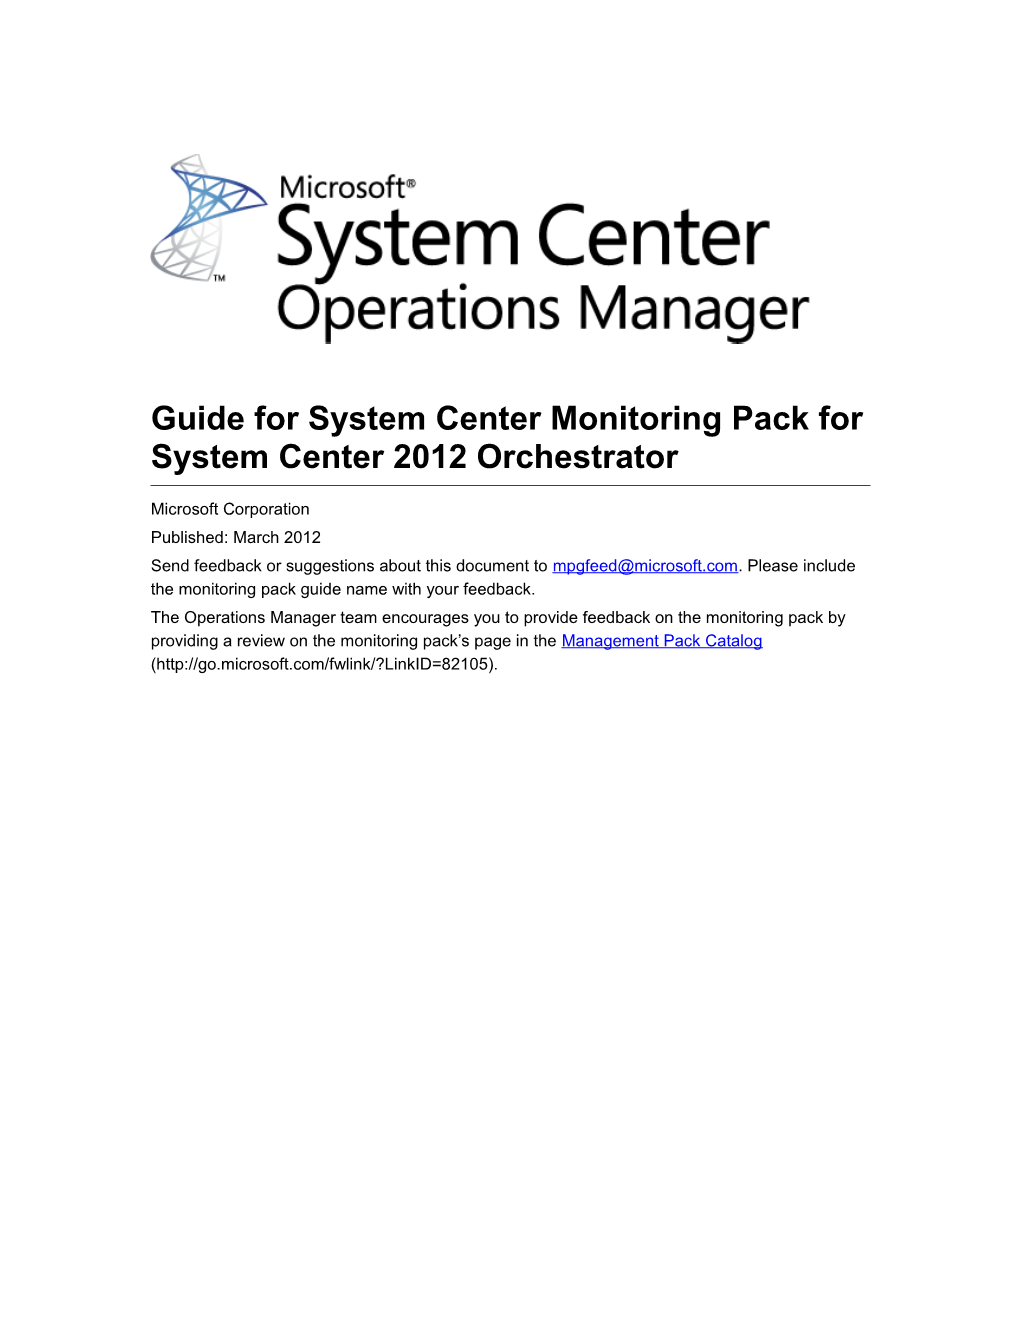 Guide for System Center Monitoring Pack for System Center 2012 Orchestrator